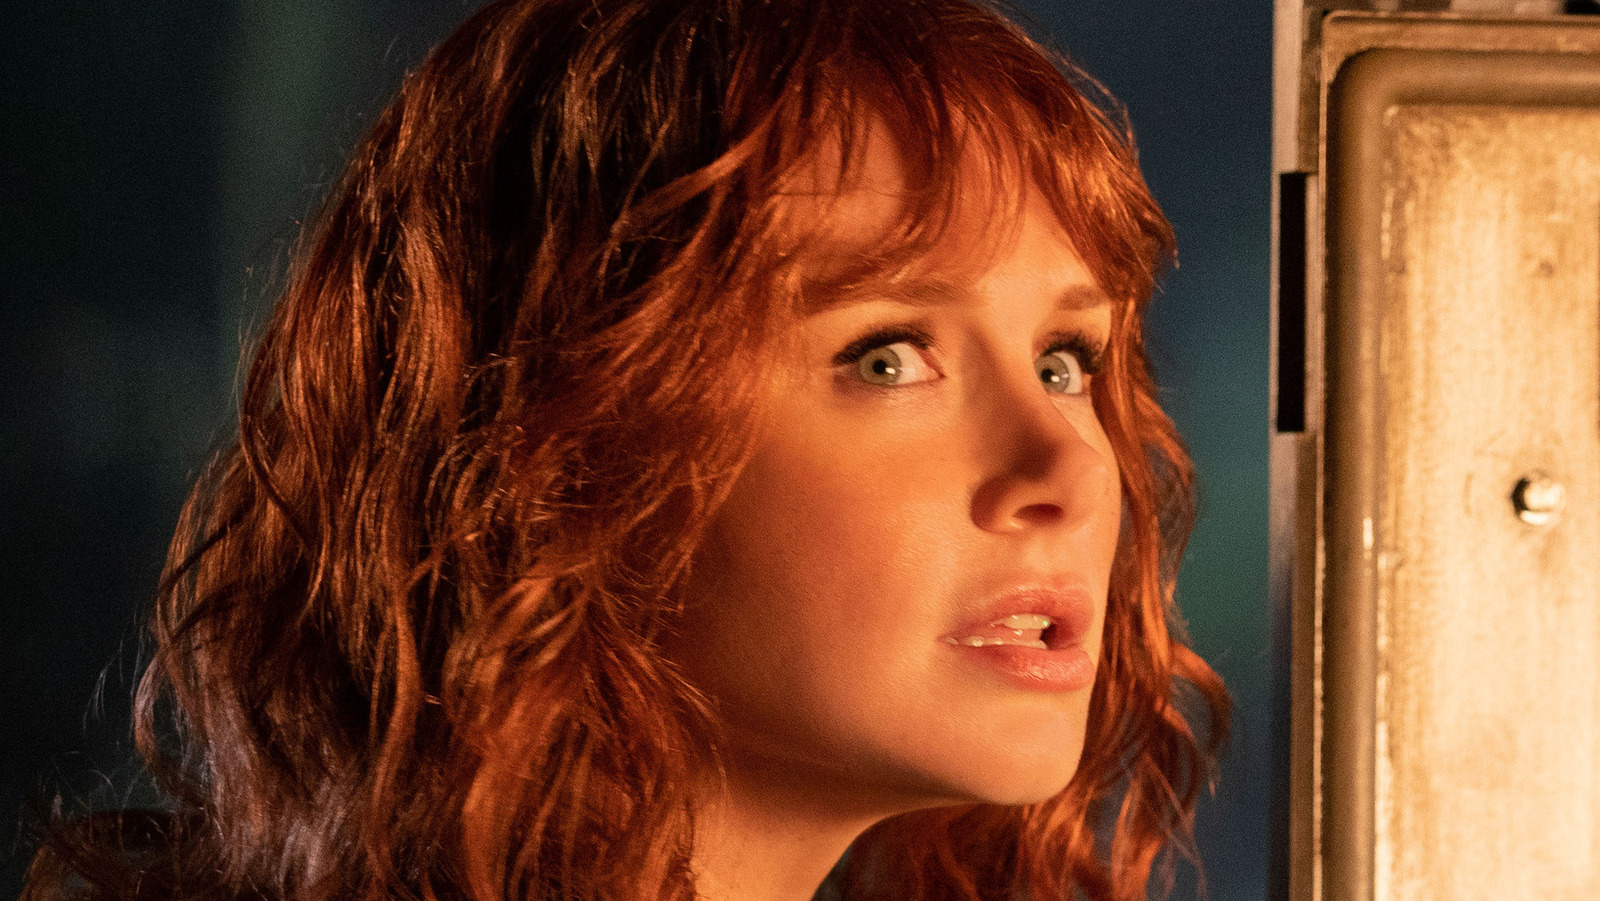 Bryce Dallas Howard And Chris Pratt On Jurassic World Dominion, OG Stars,  And Filming Challenges - Exclusive Interview